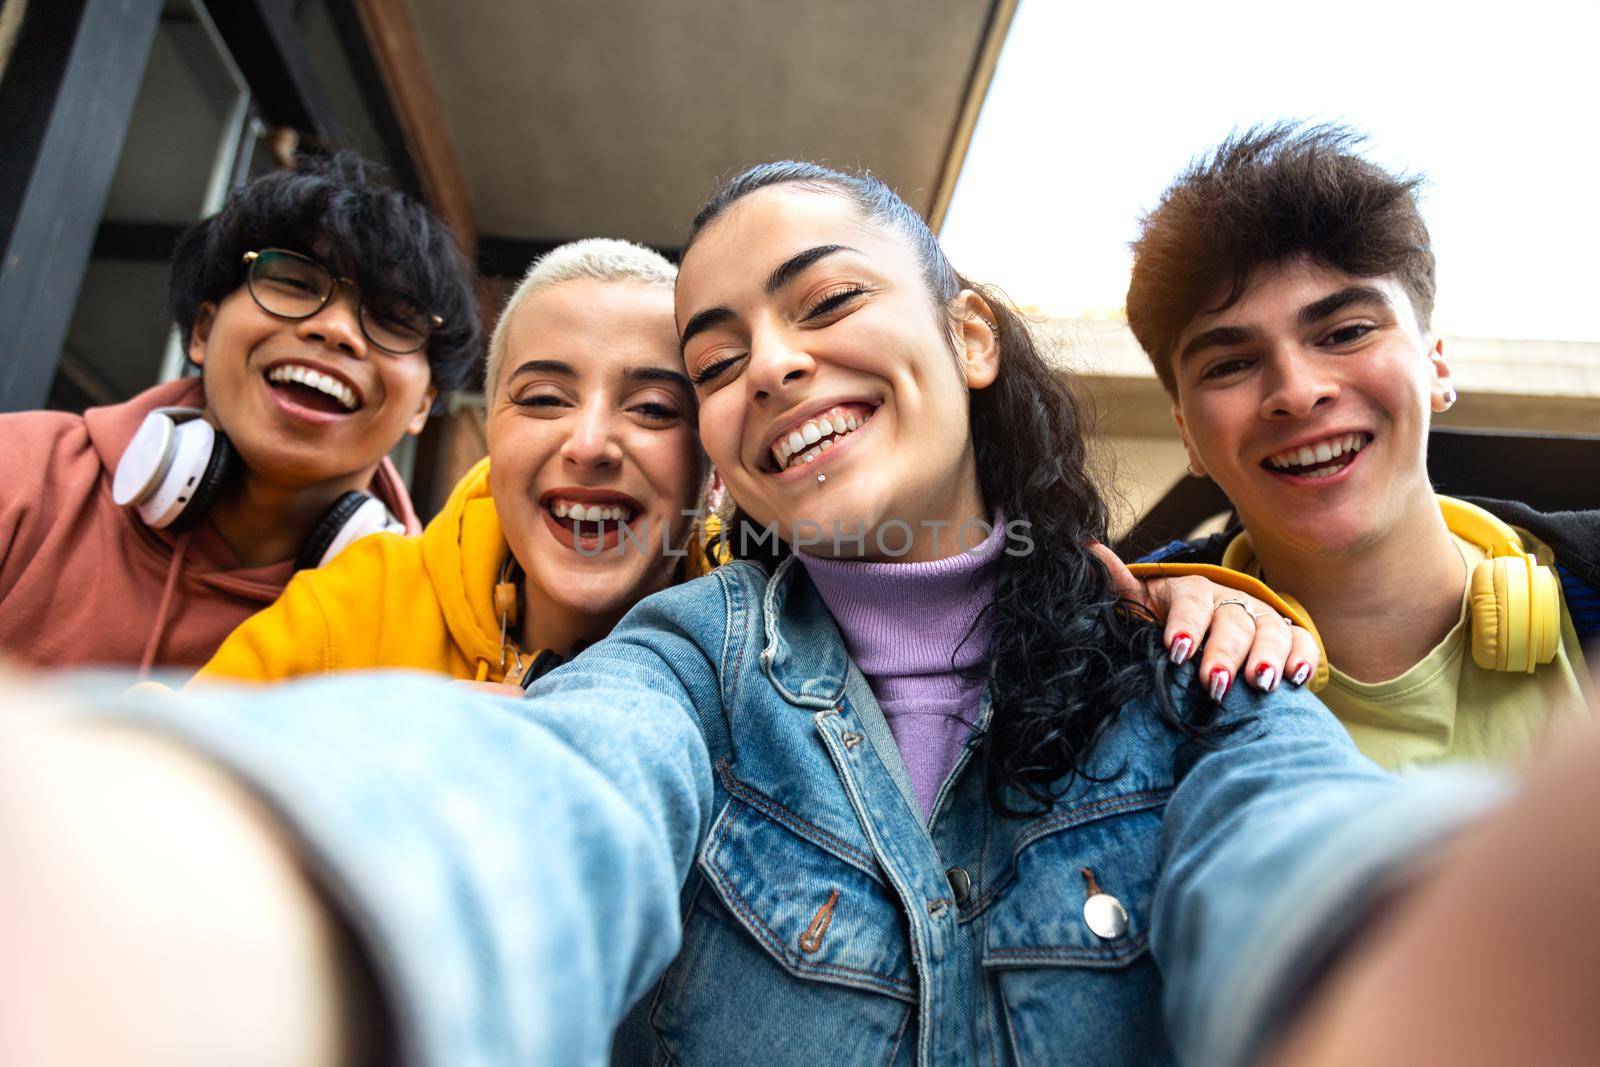 Smiling multiracial group of friends take selfie with phone outside university building. Students laughing and having fun. Youth lifestyle and social media concept.